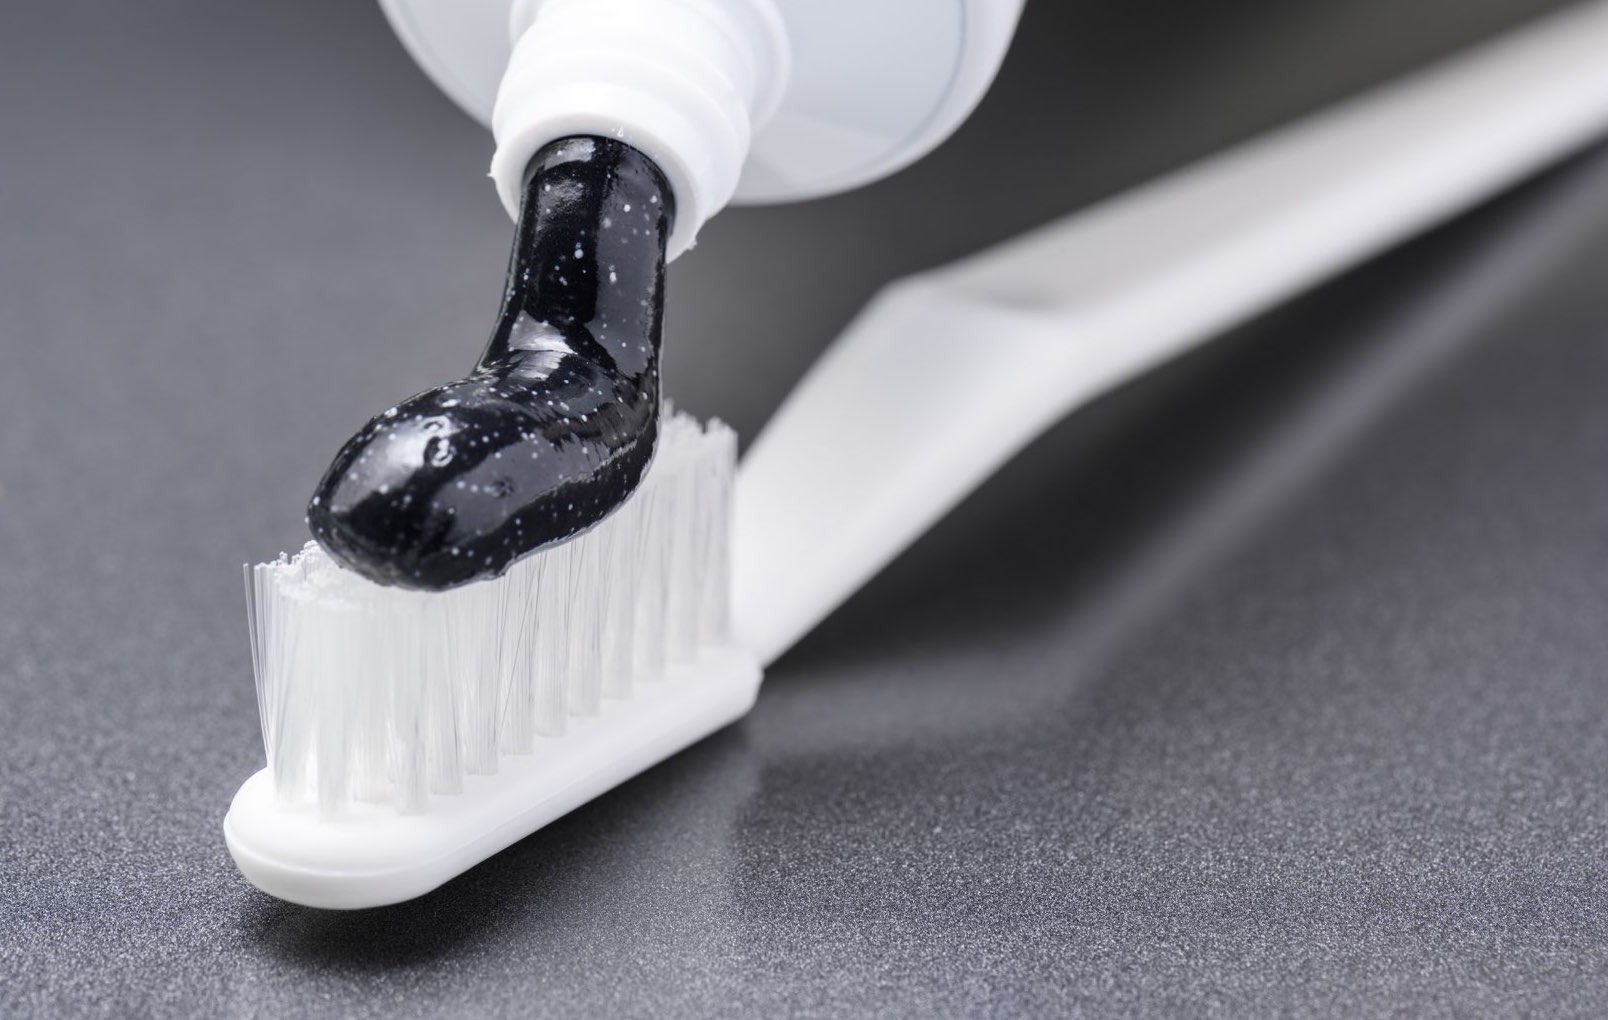 Charcoal toothpaste